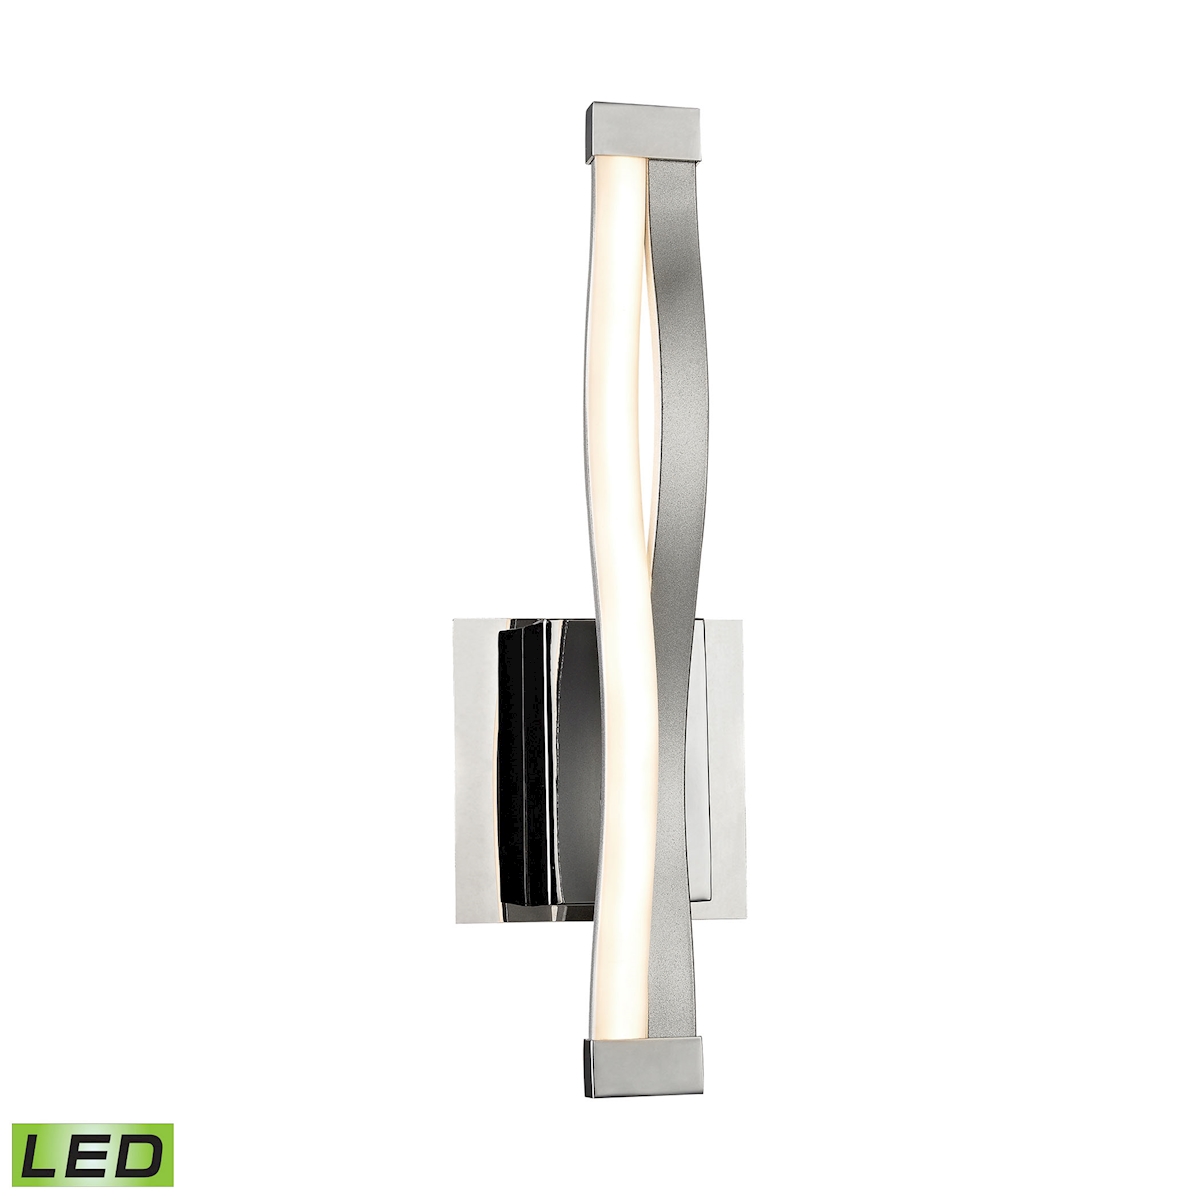 Twist 1-Light Wall Lamp in Aluminum and Chrome with Opal Glass Diffuser - Integrated LED_WSL1351-10-98